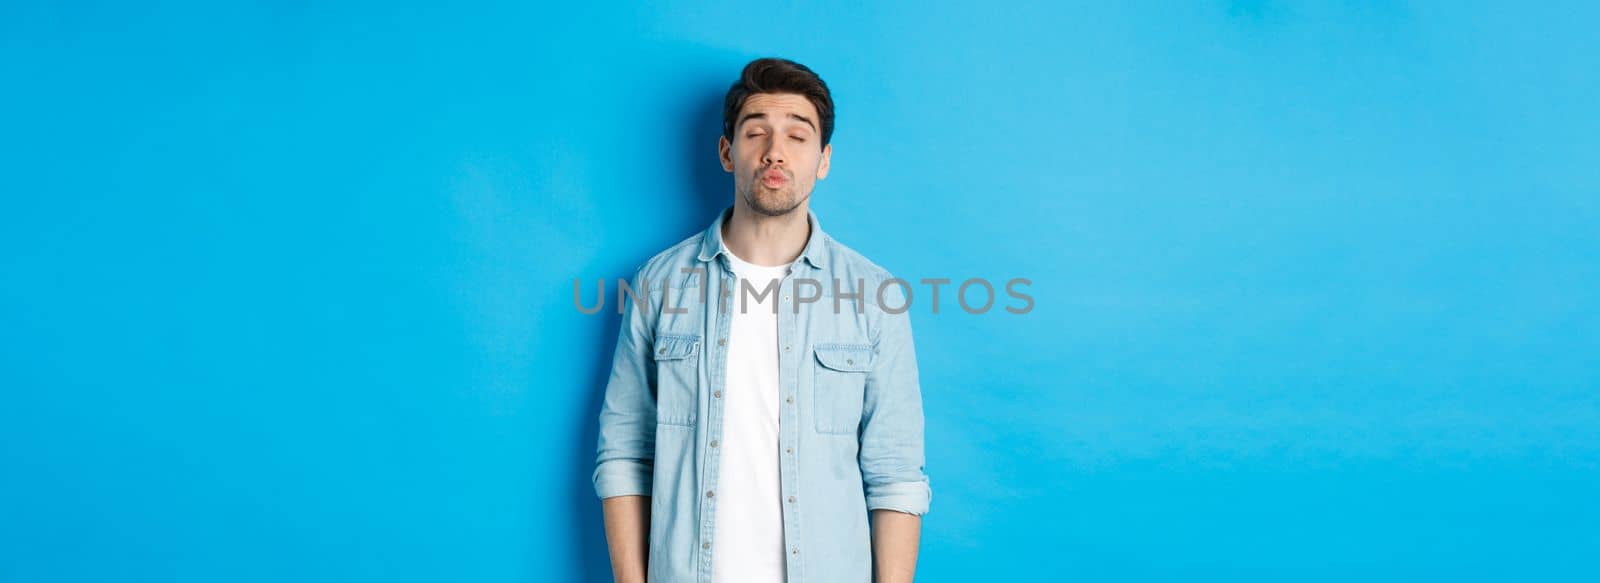 Handsome man waiting for kiss, pucker lips and close eyes while standing against blue background.